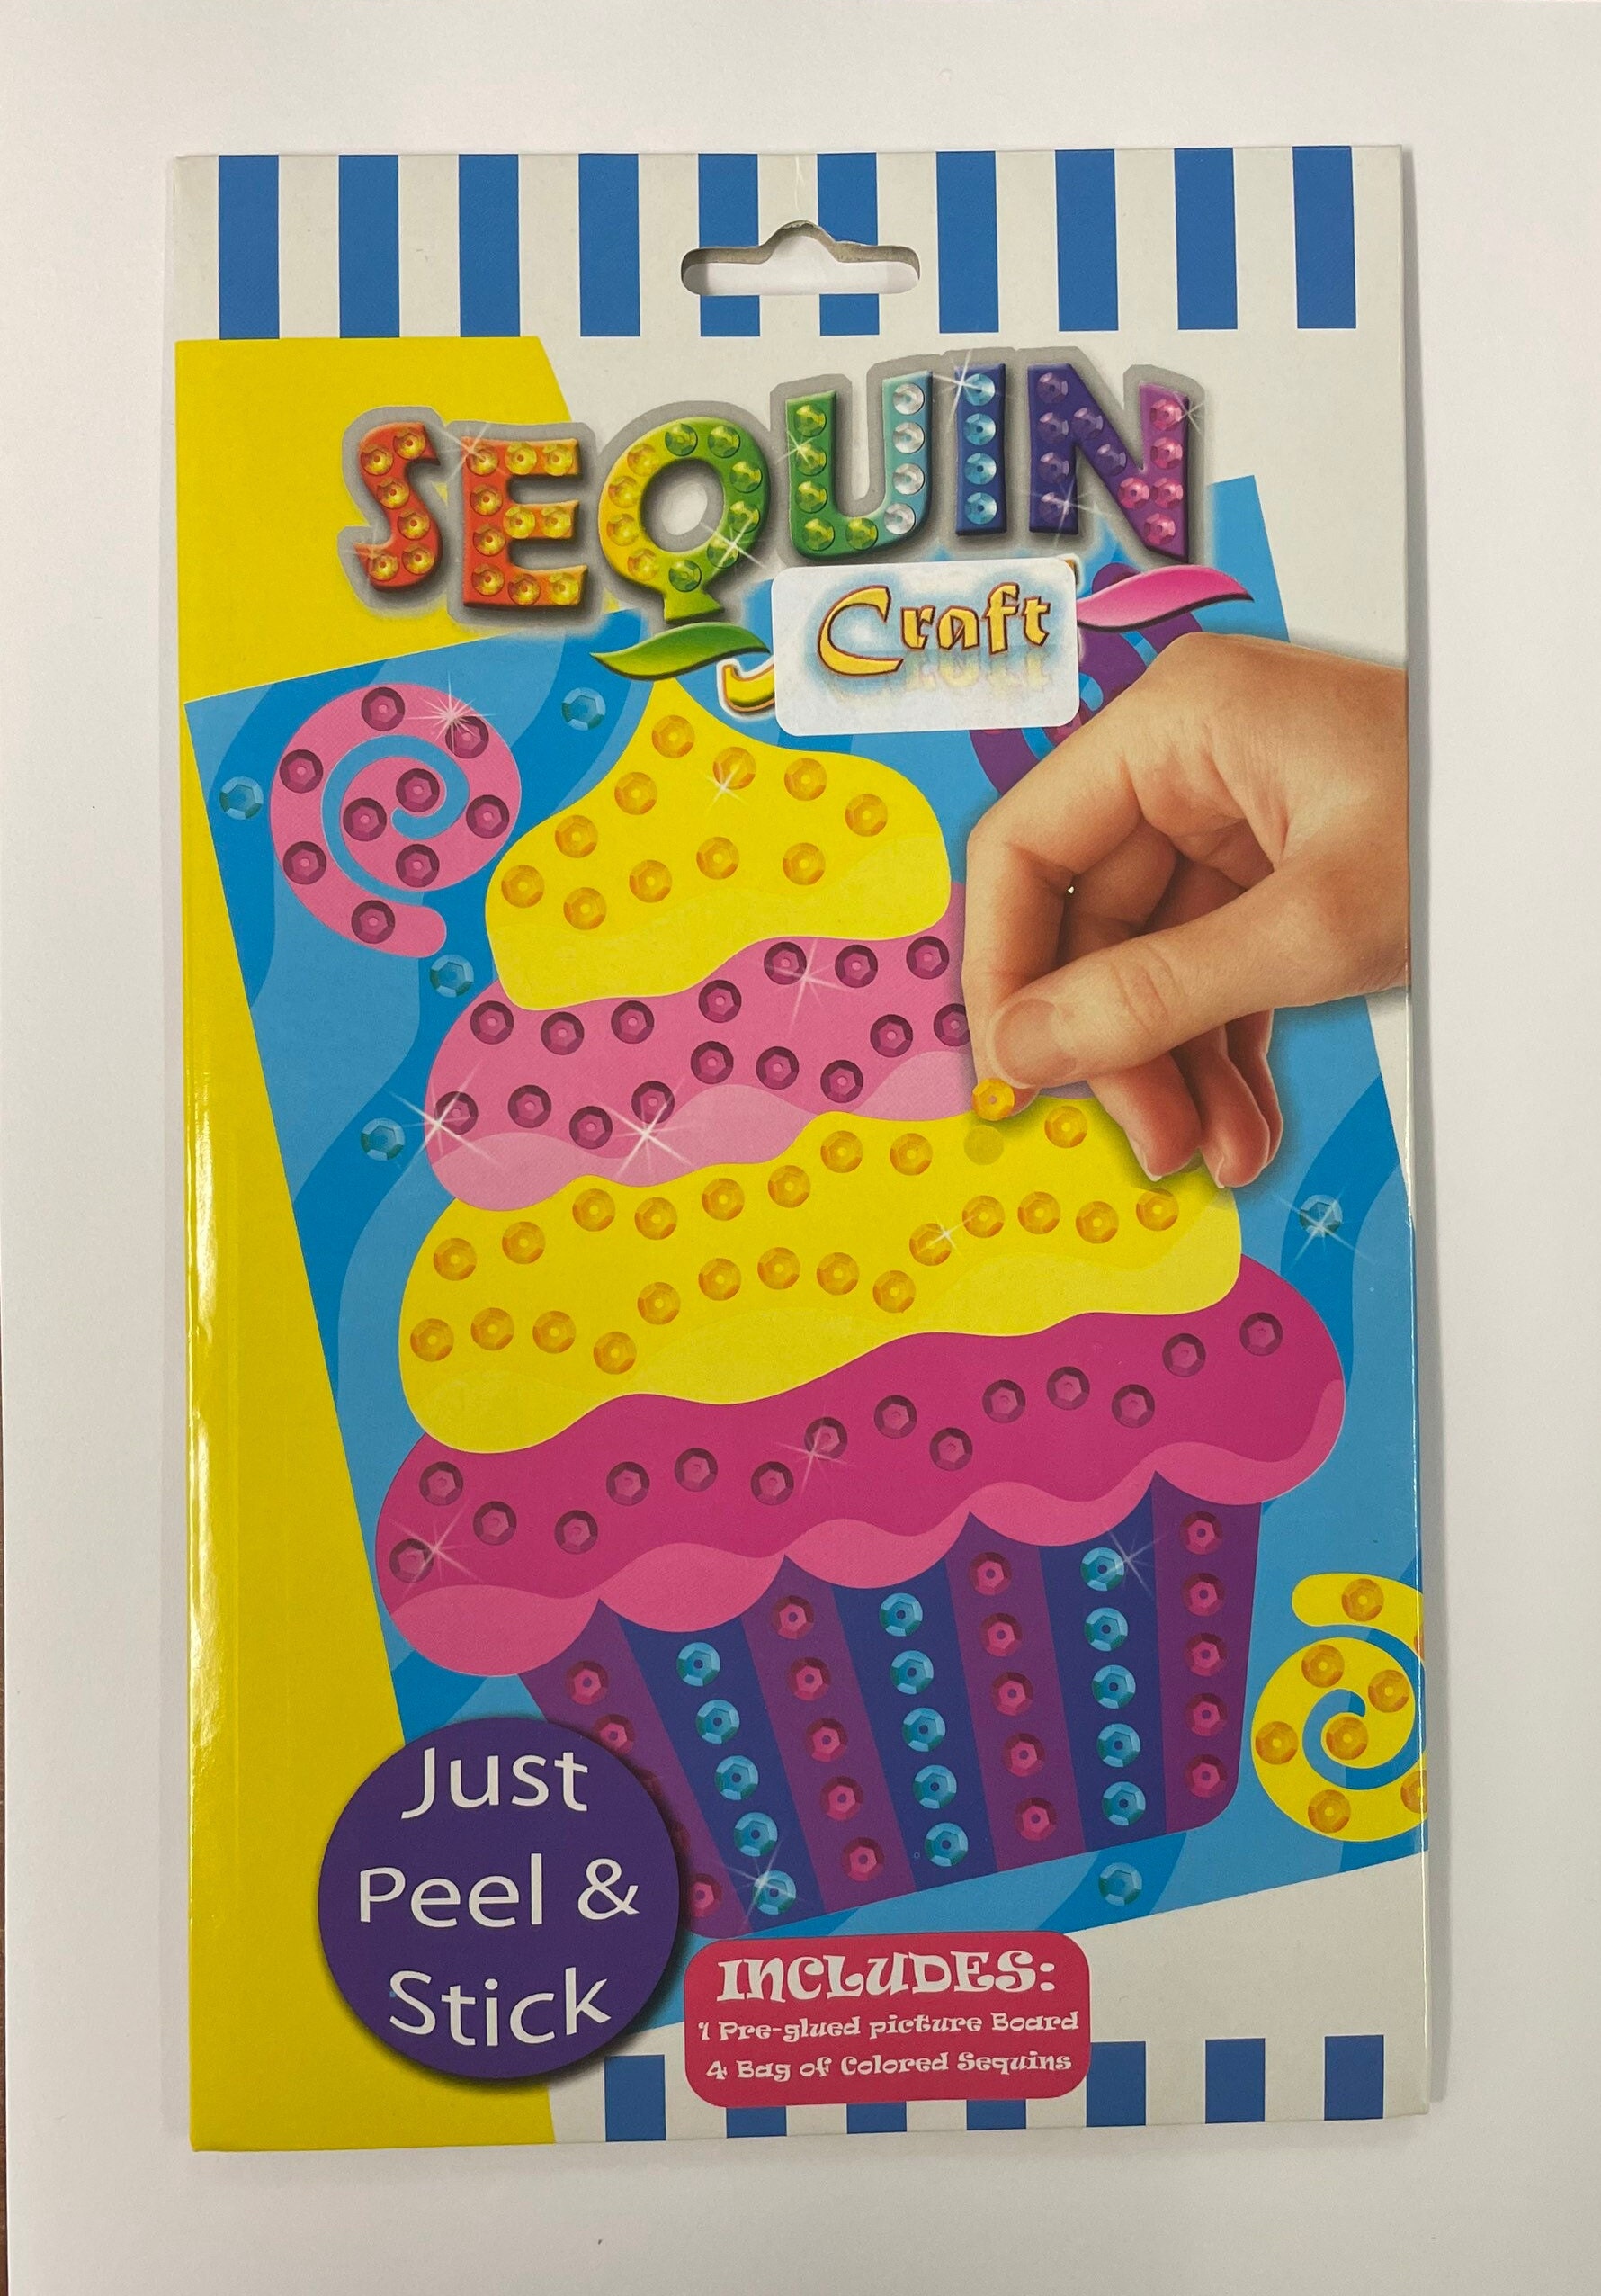 Sequin Art® Craft Teen, Love, Sparkling Arts and Crafts Picture Kit